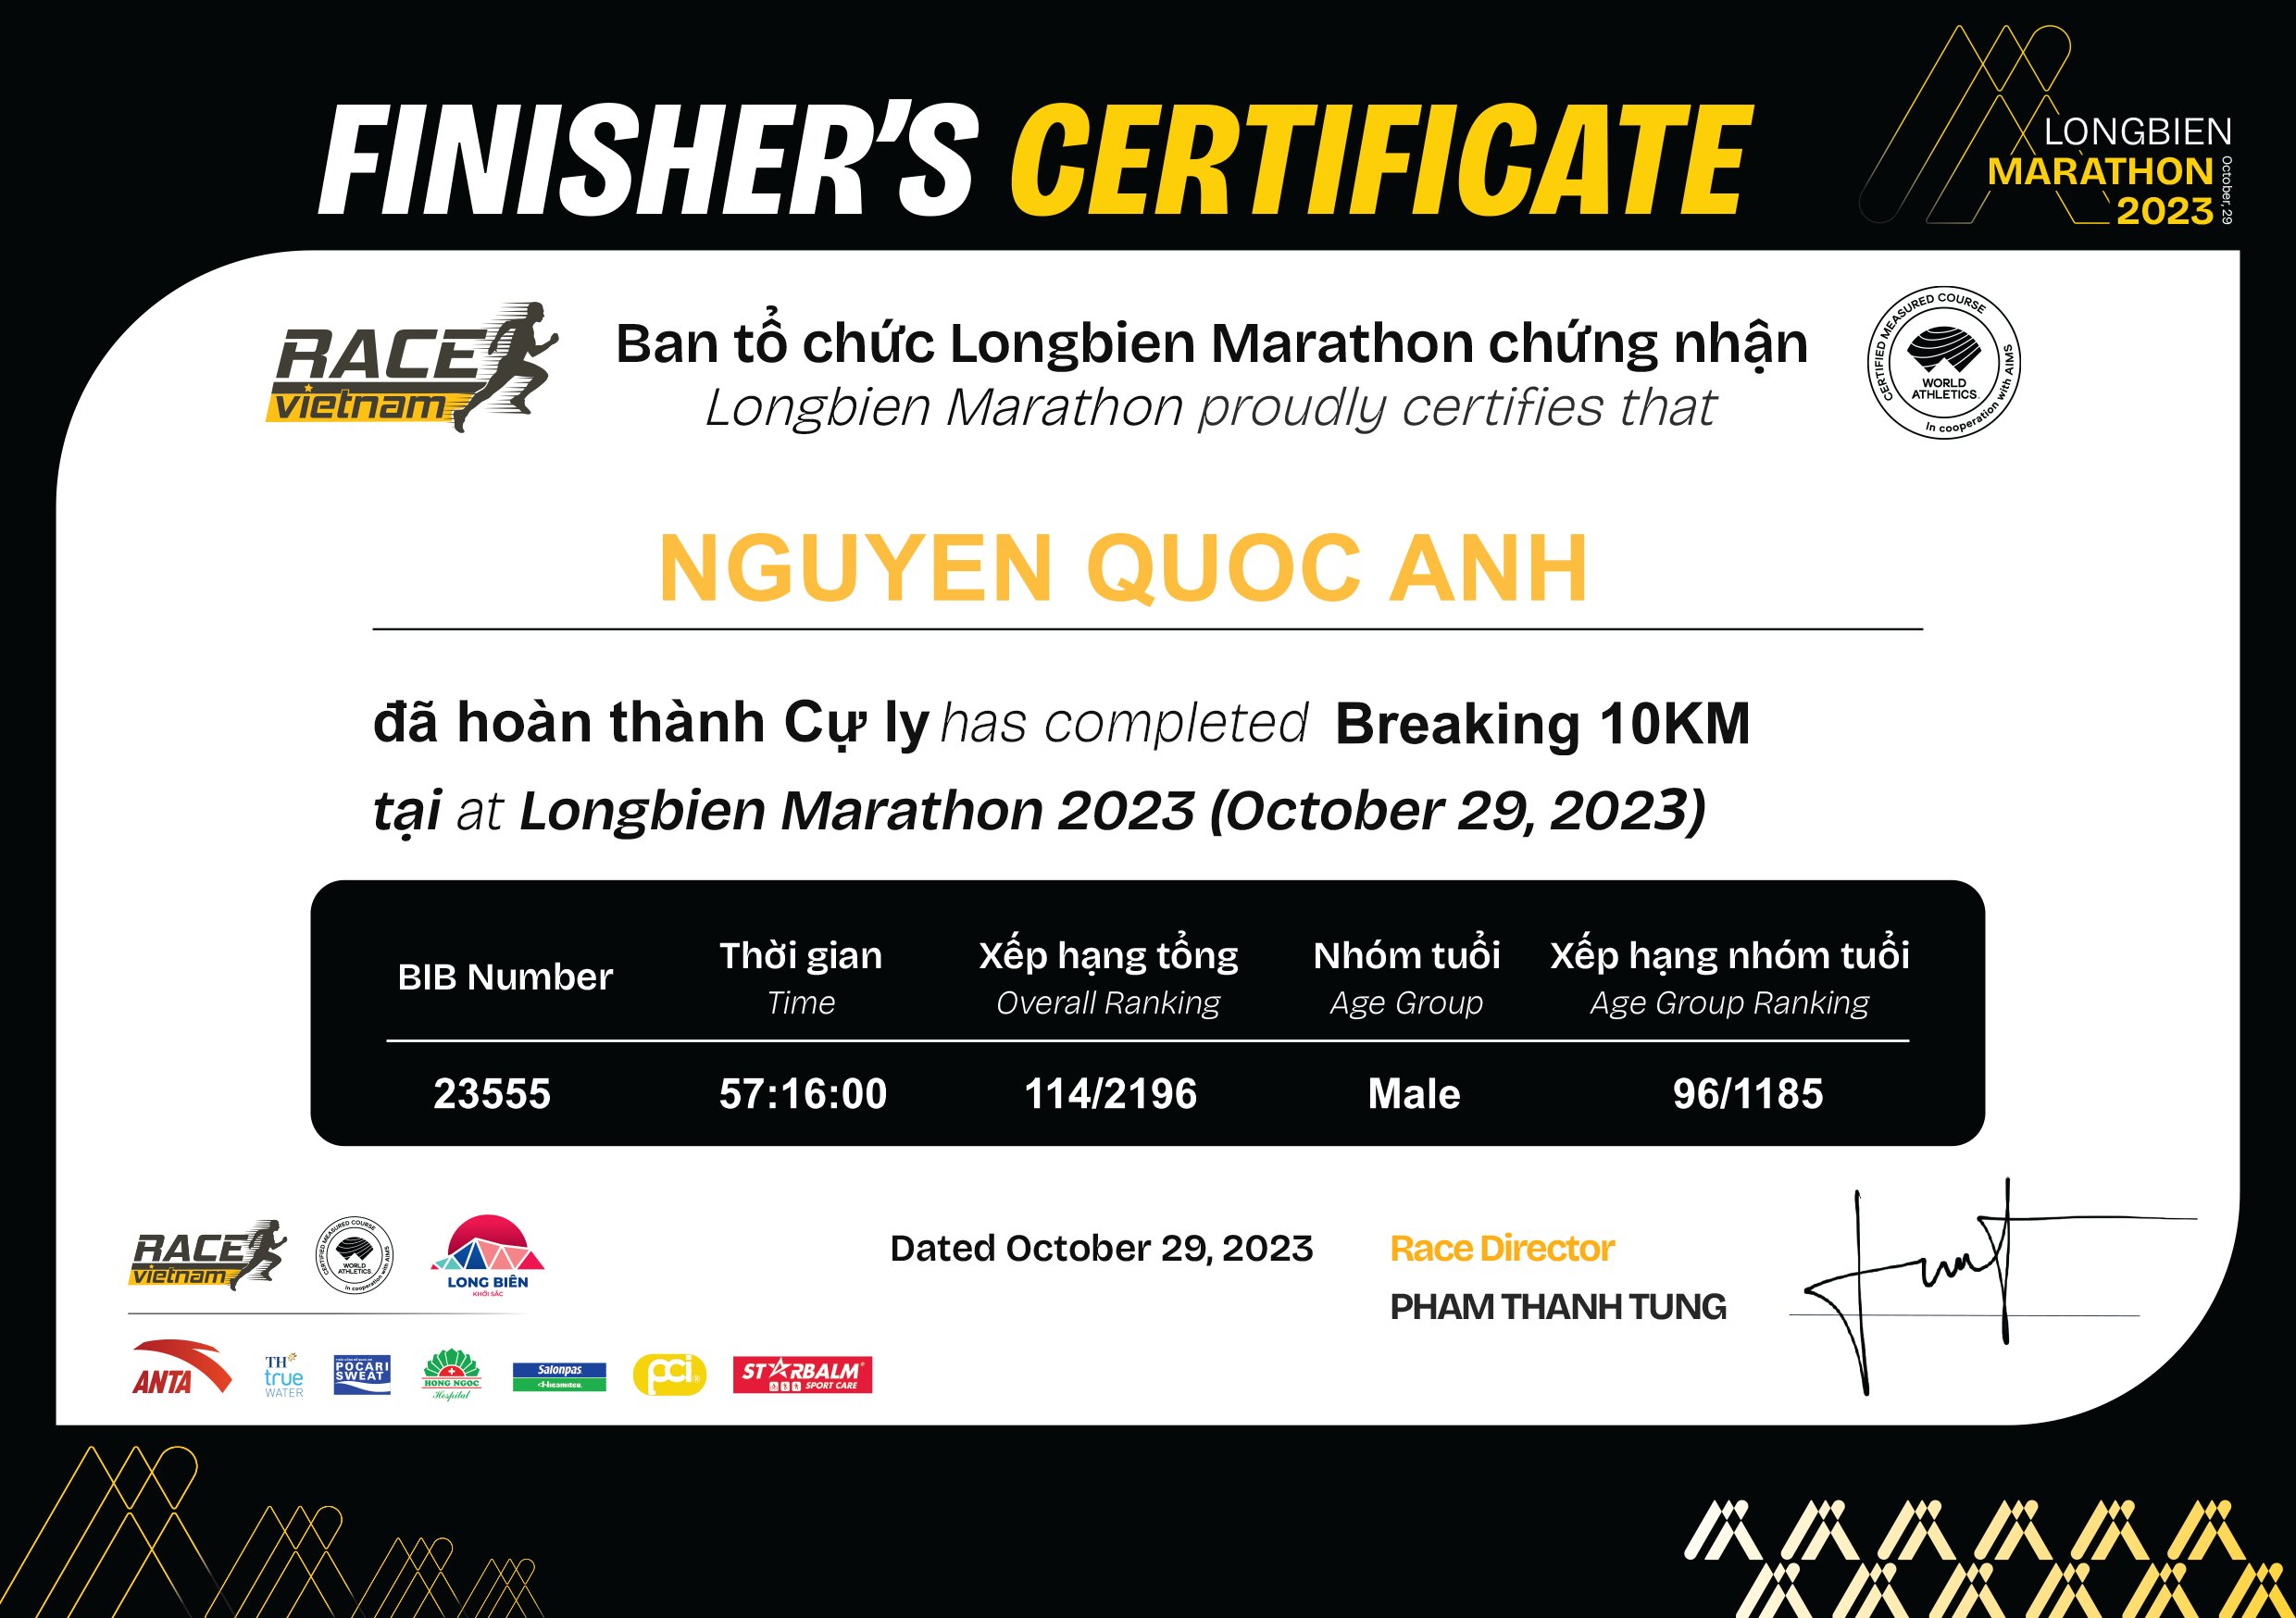 23555 - Nguyen Quoc Anh